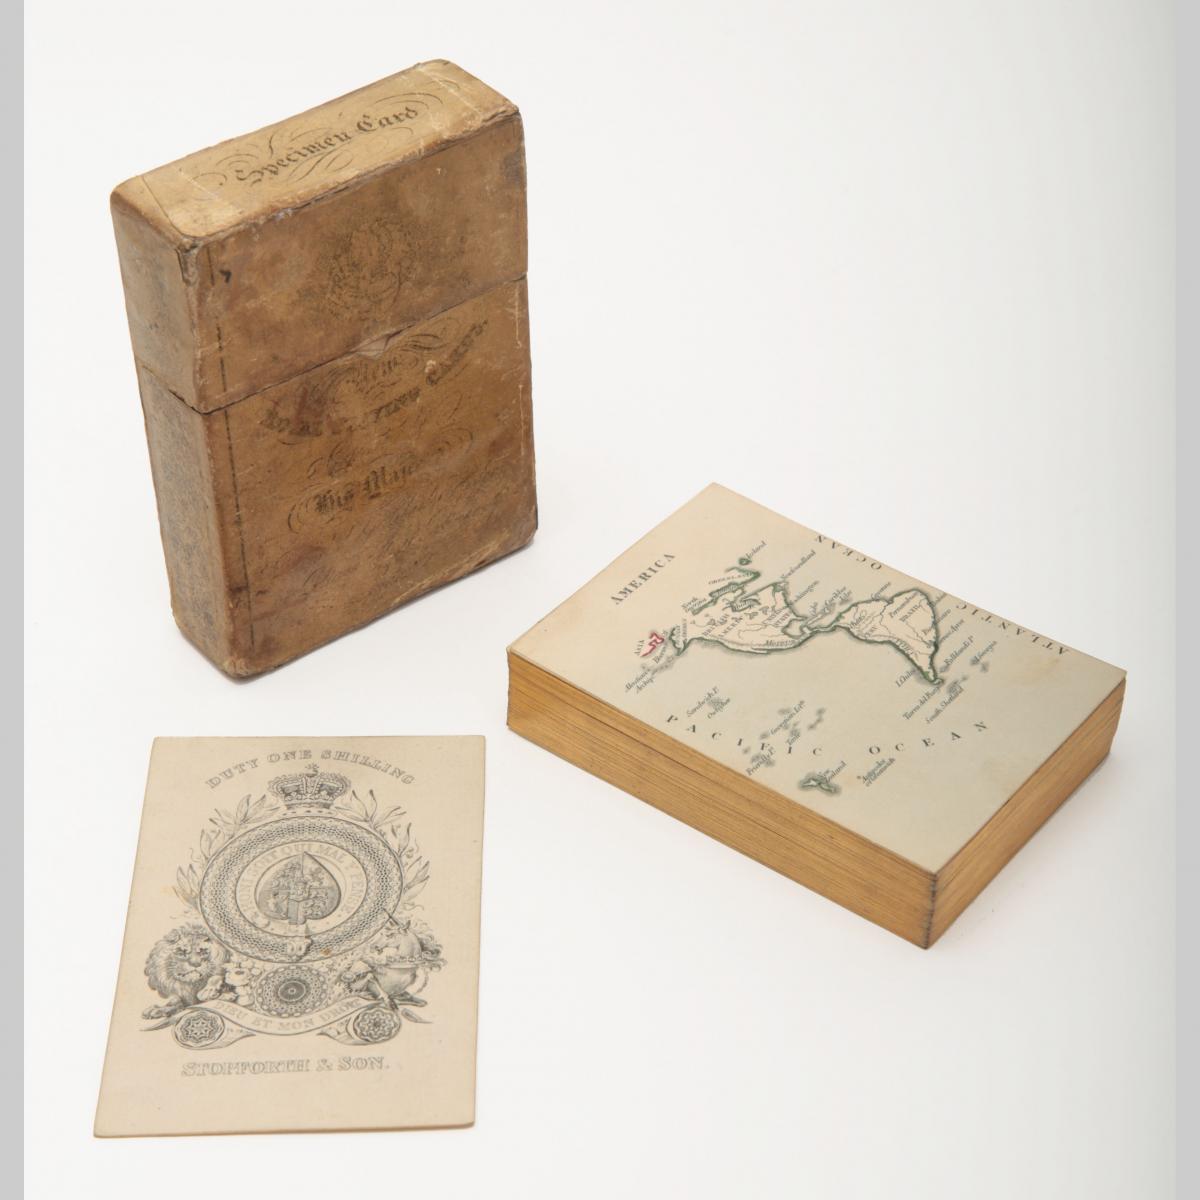 Rare Geographical playing cards known as "Hodges Geographical”